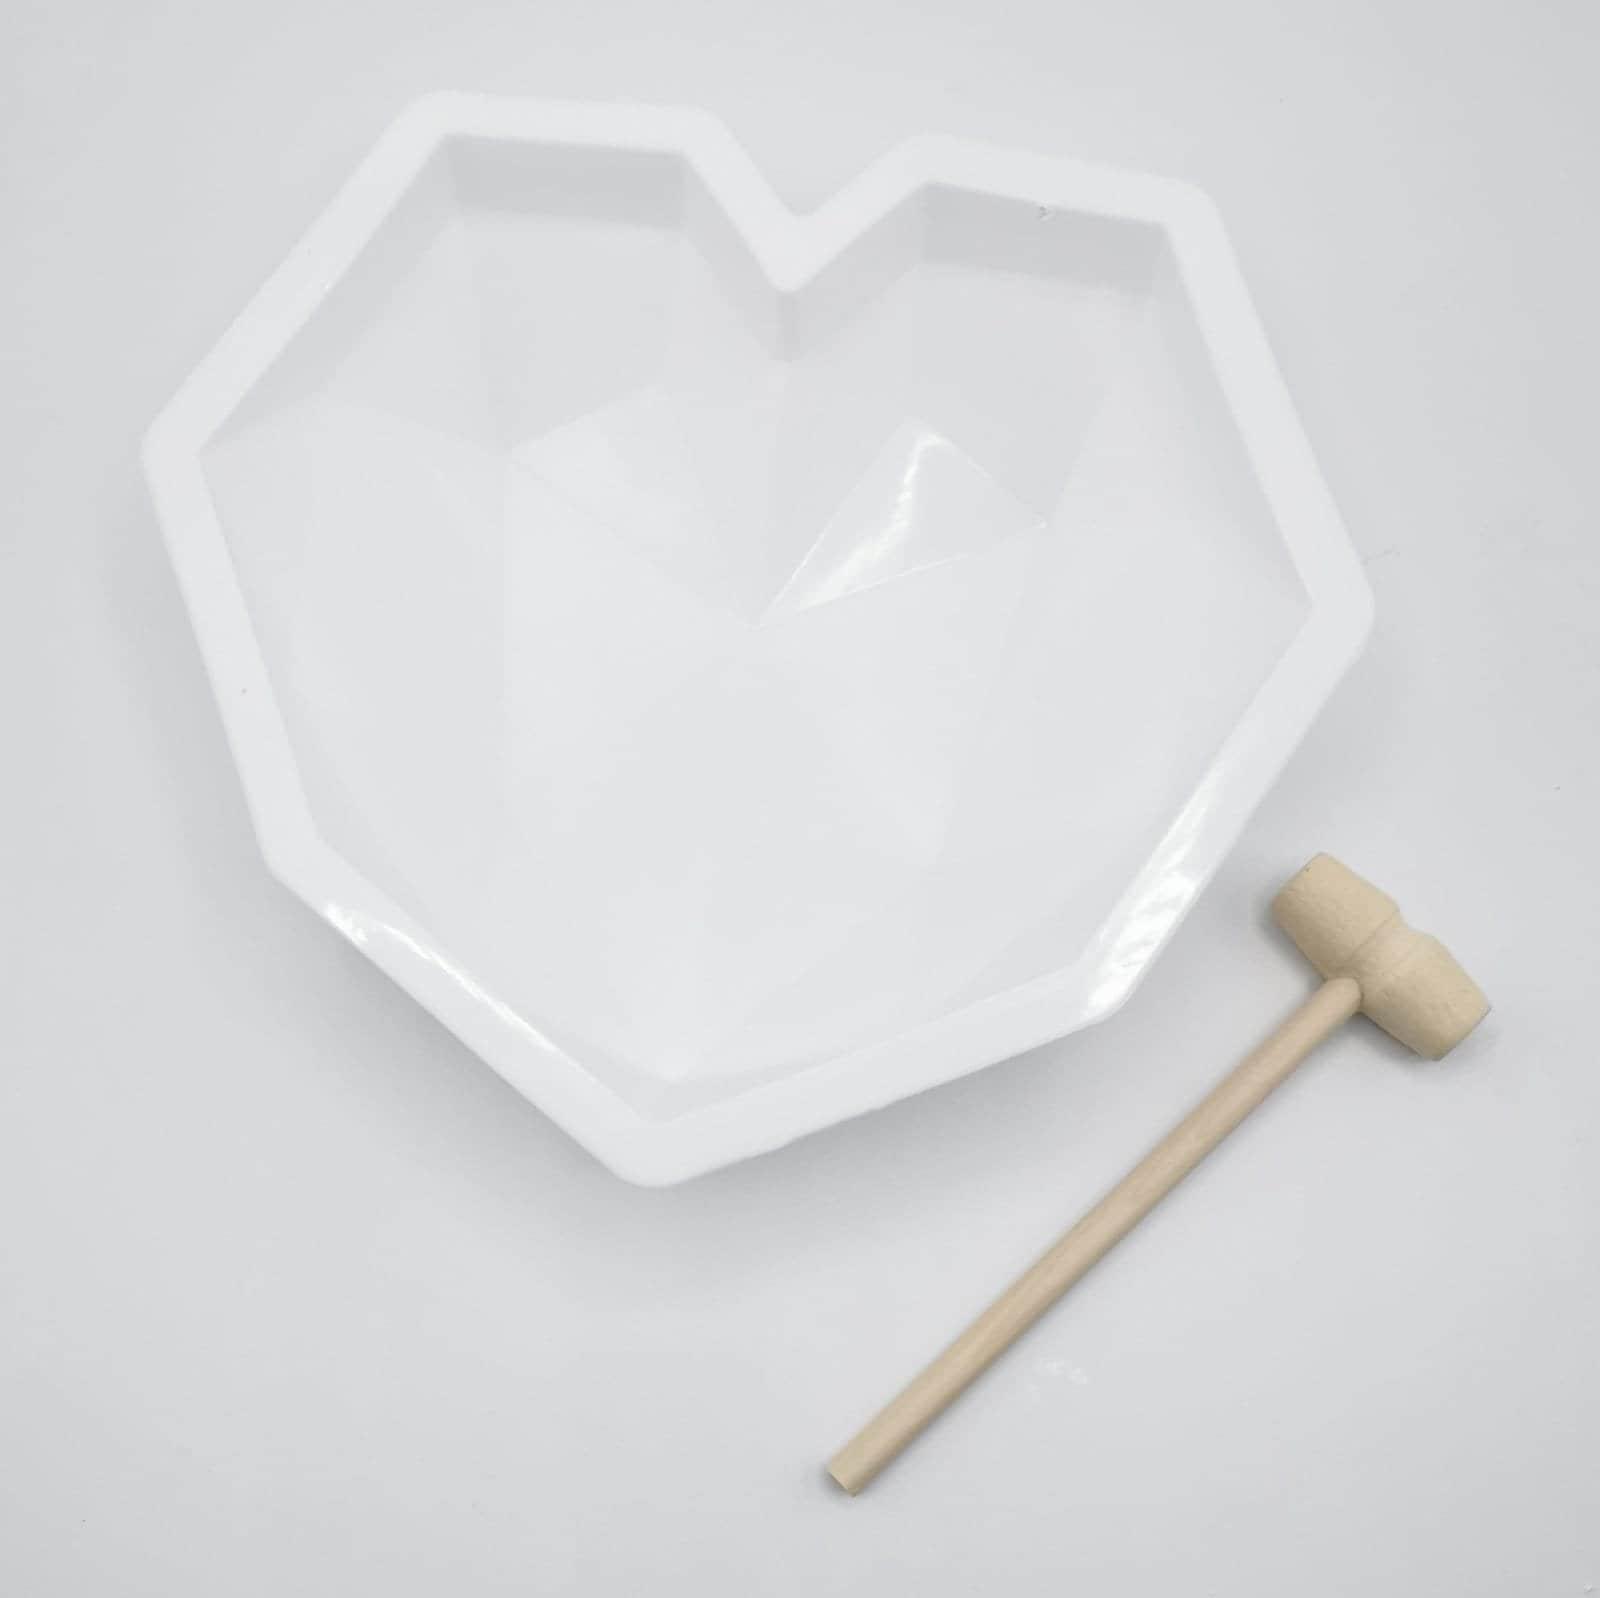 Large Geometric Heart Mold with Wooden Mallet